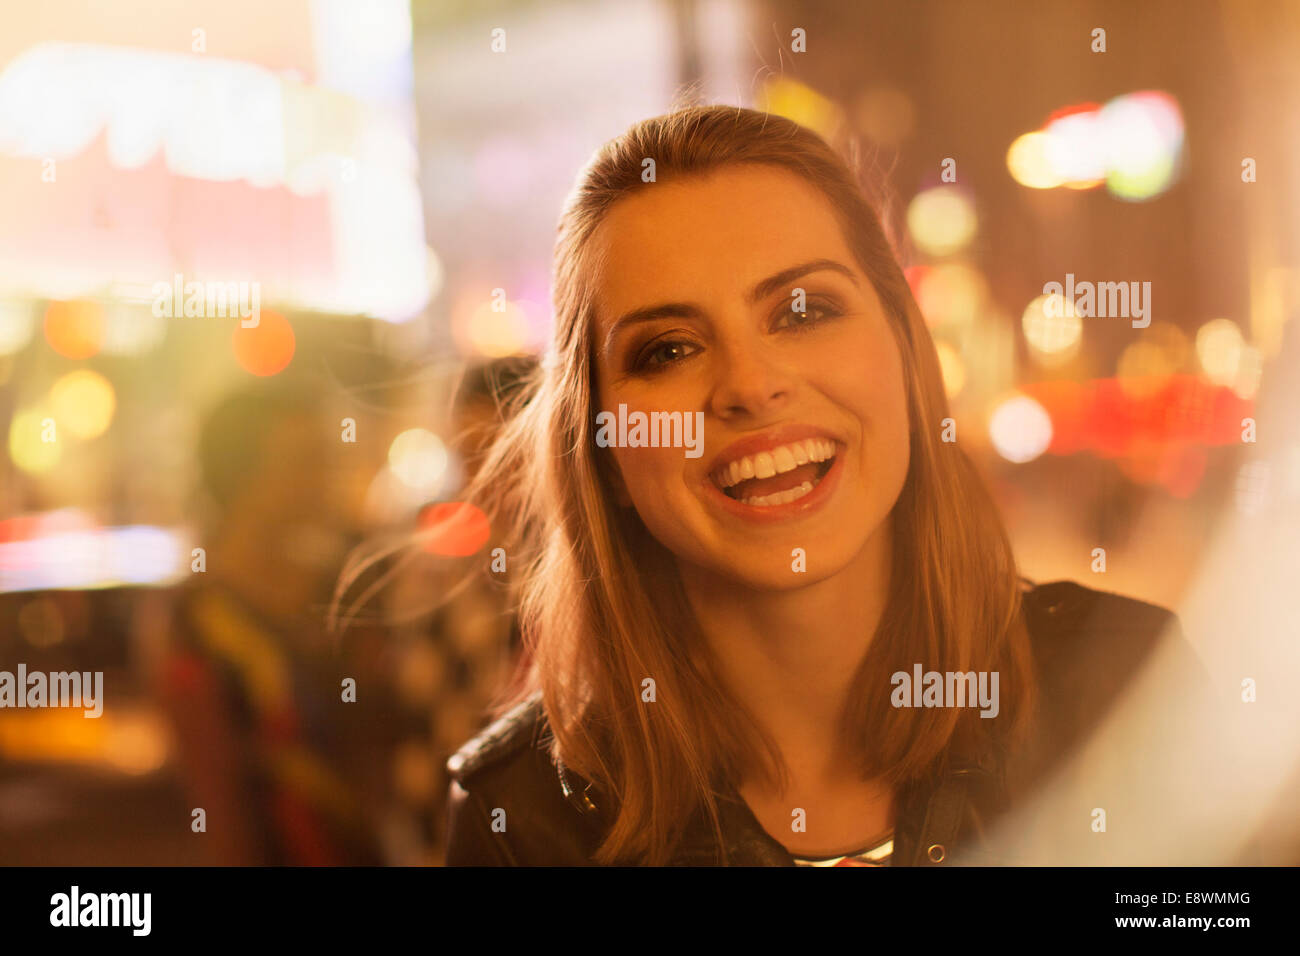 Woman smiling on city street at night Banque D'Images